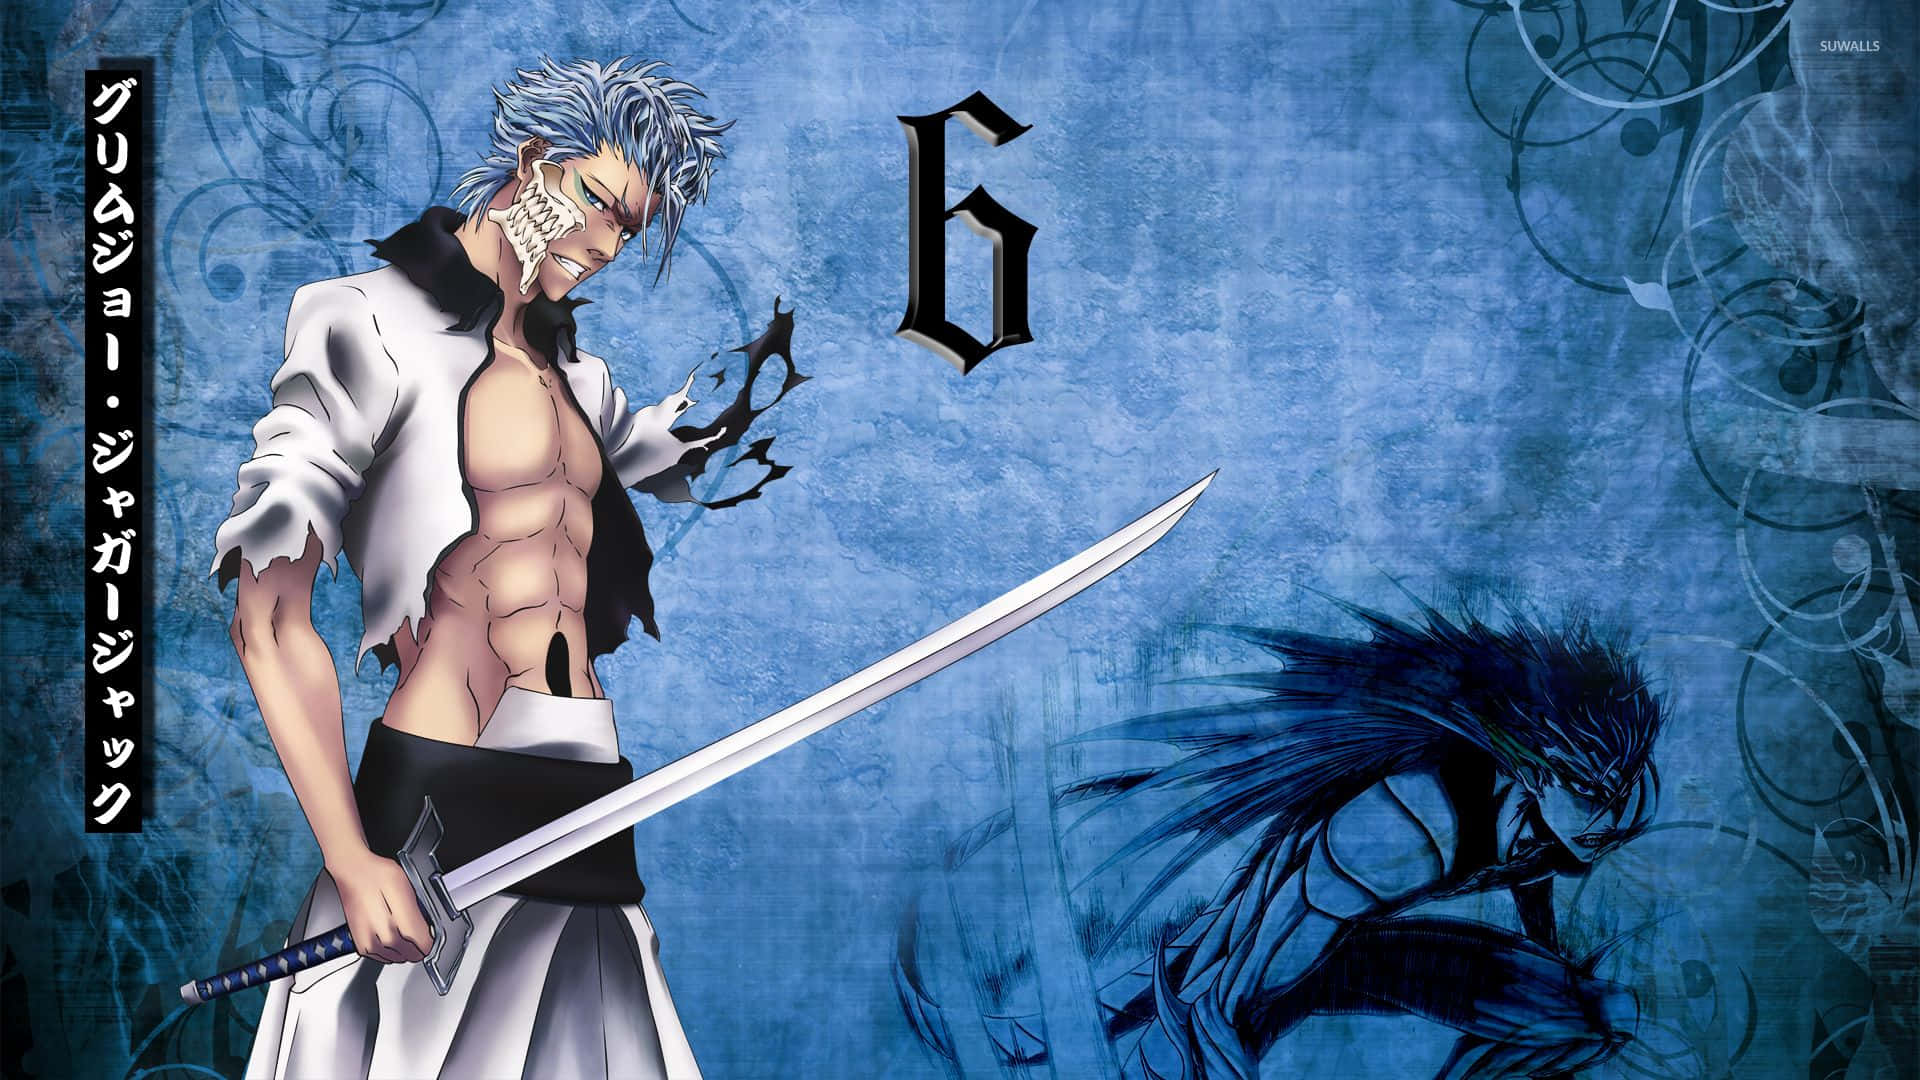 Toshiro Hitsugaya, Captain Of The Tenth Division, From The Manga And Anime Series, Bleach Background